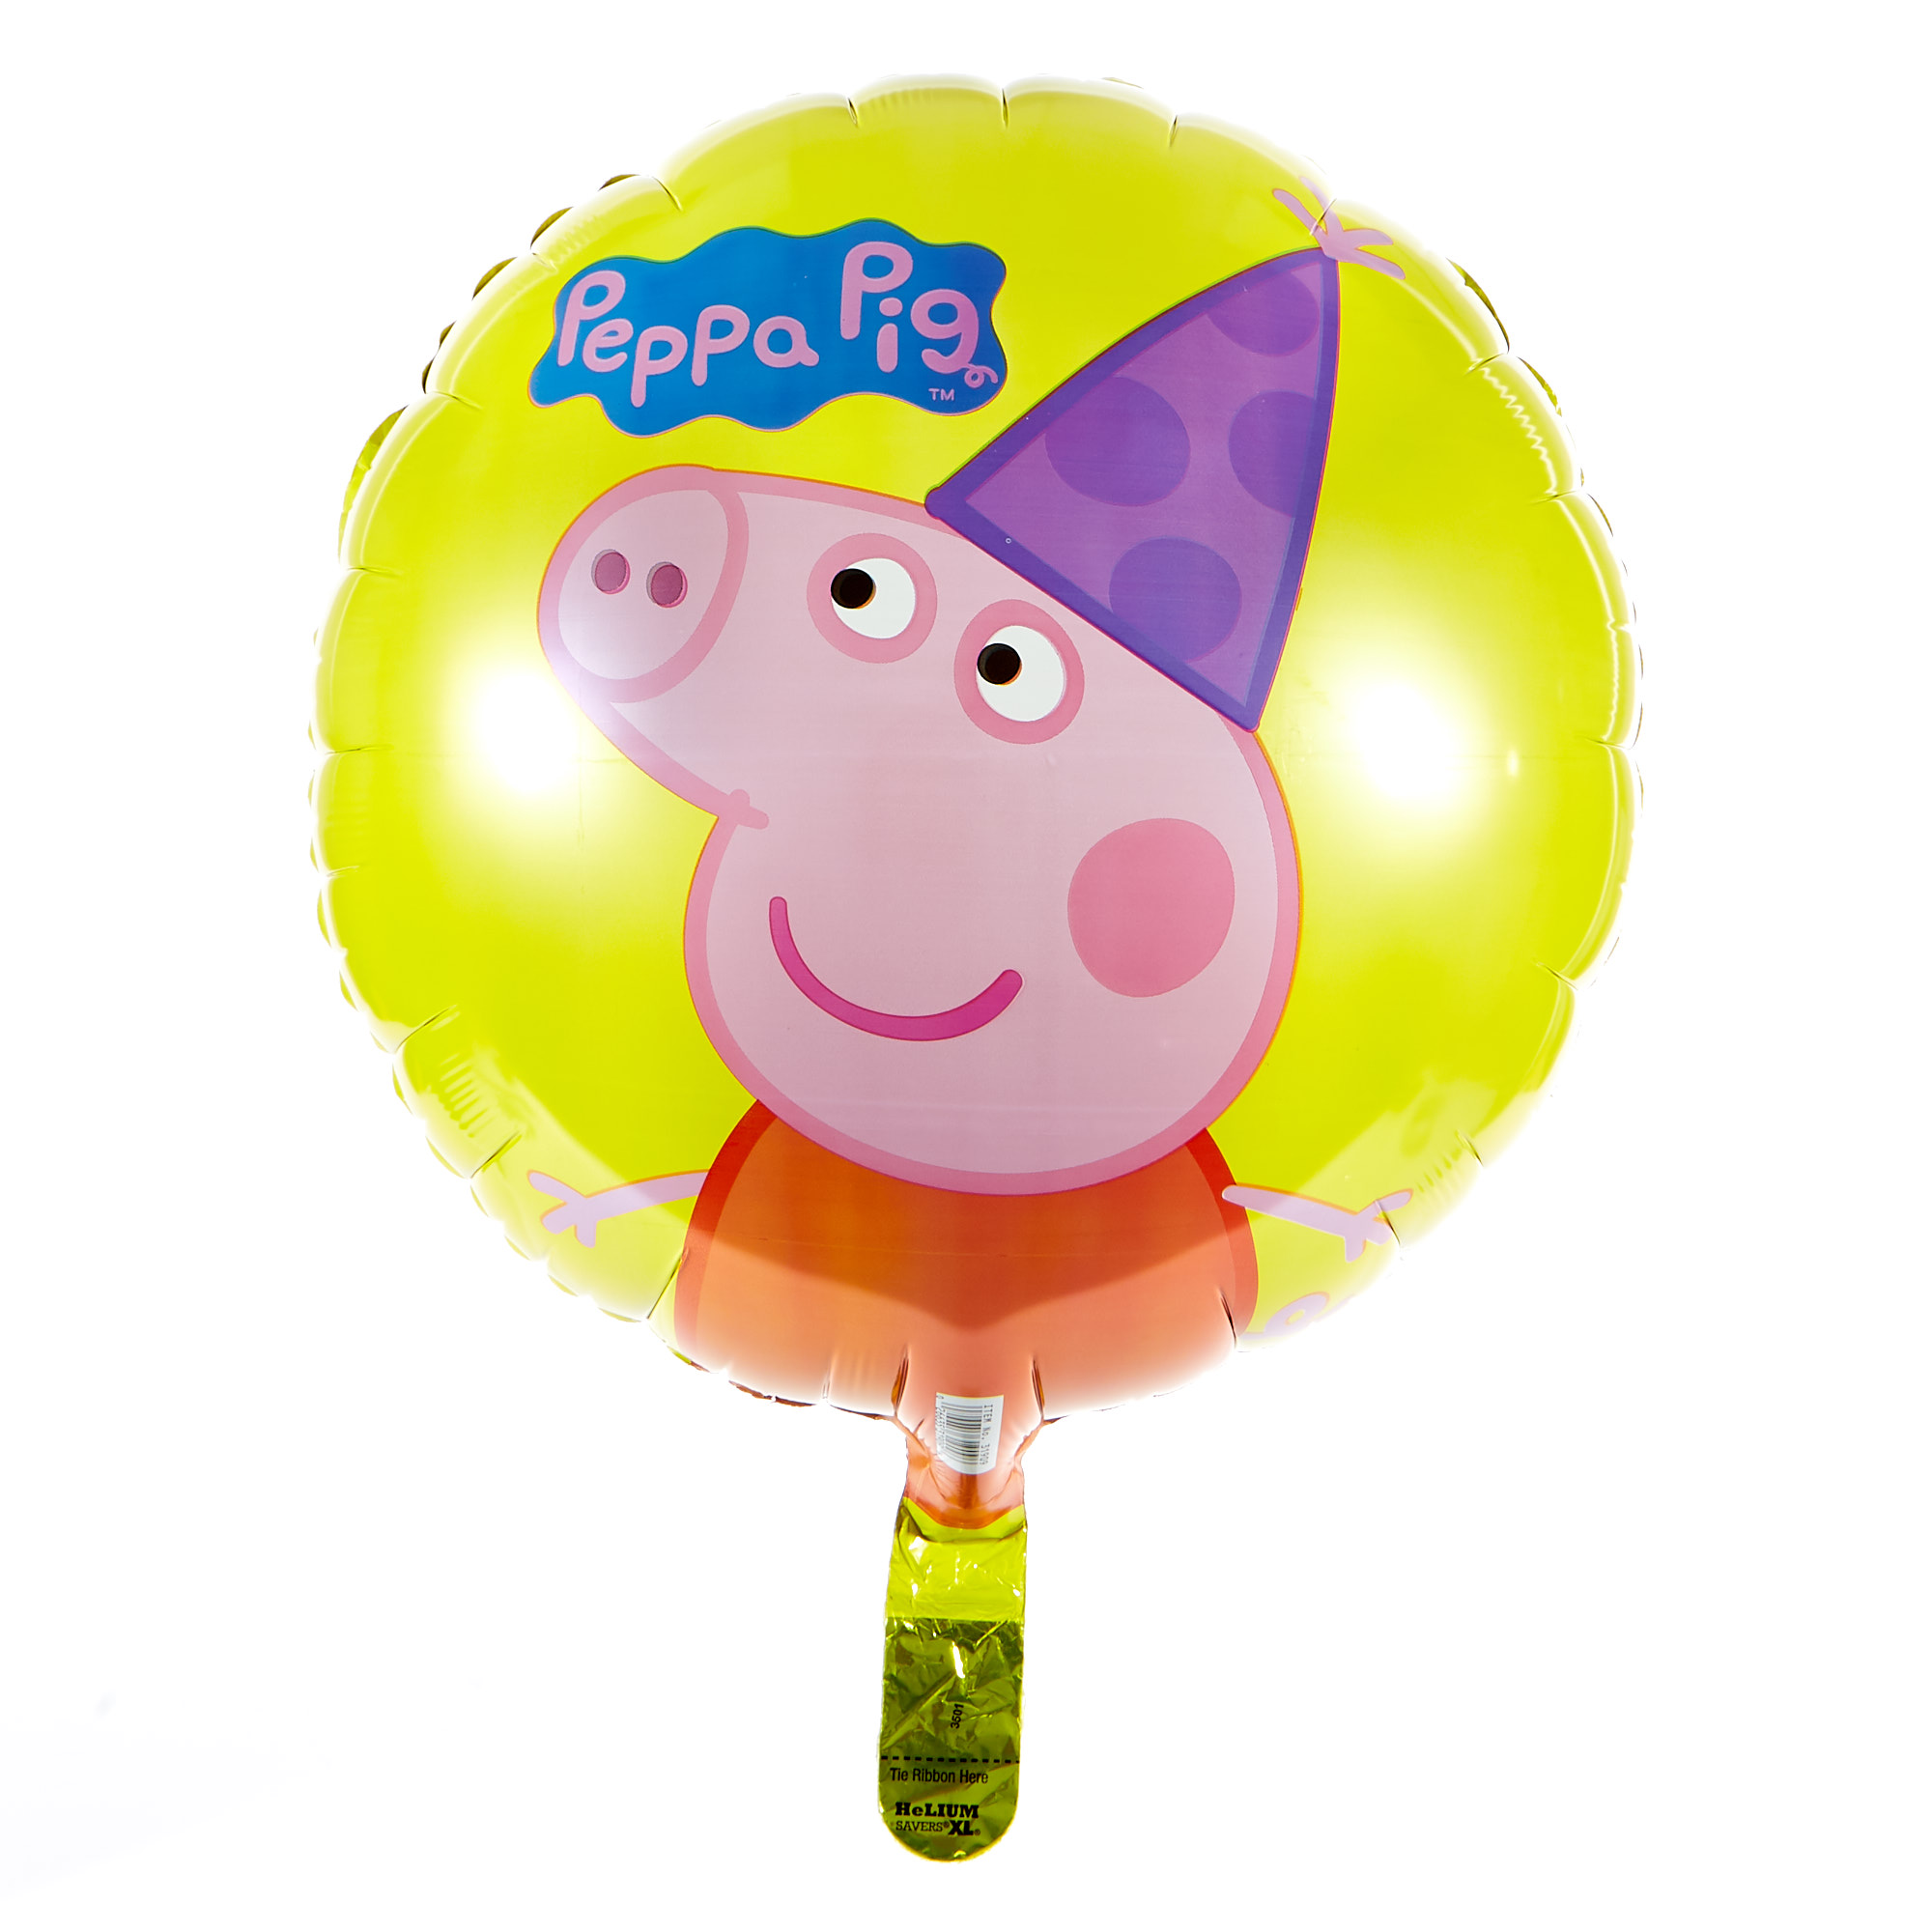 Buy Peppa Pig 17-Inch Foil Helium Balloon for GBP 3.99